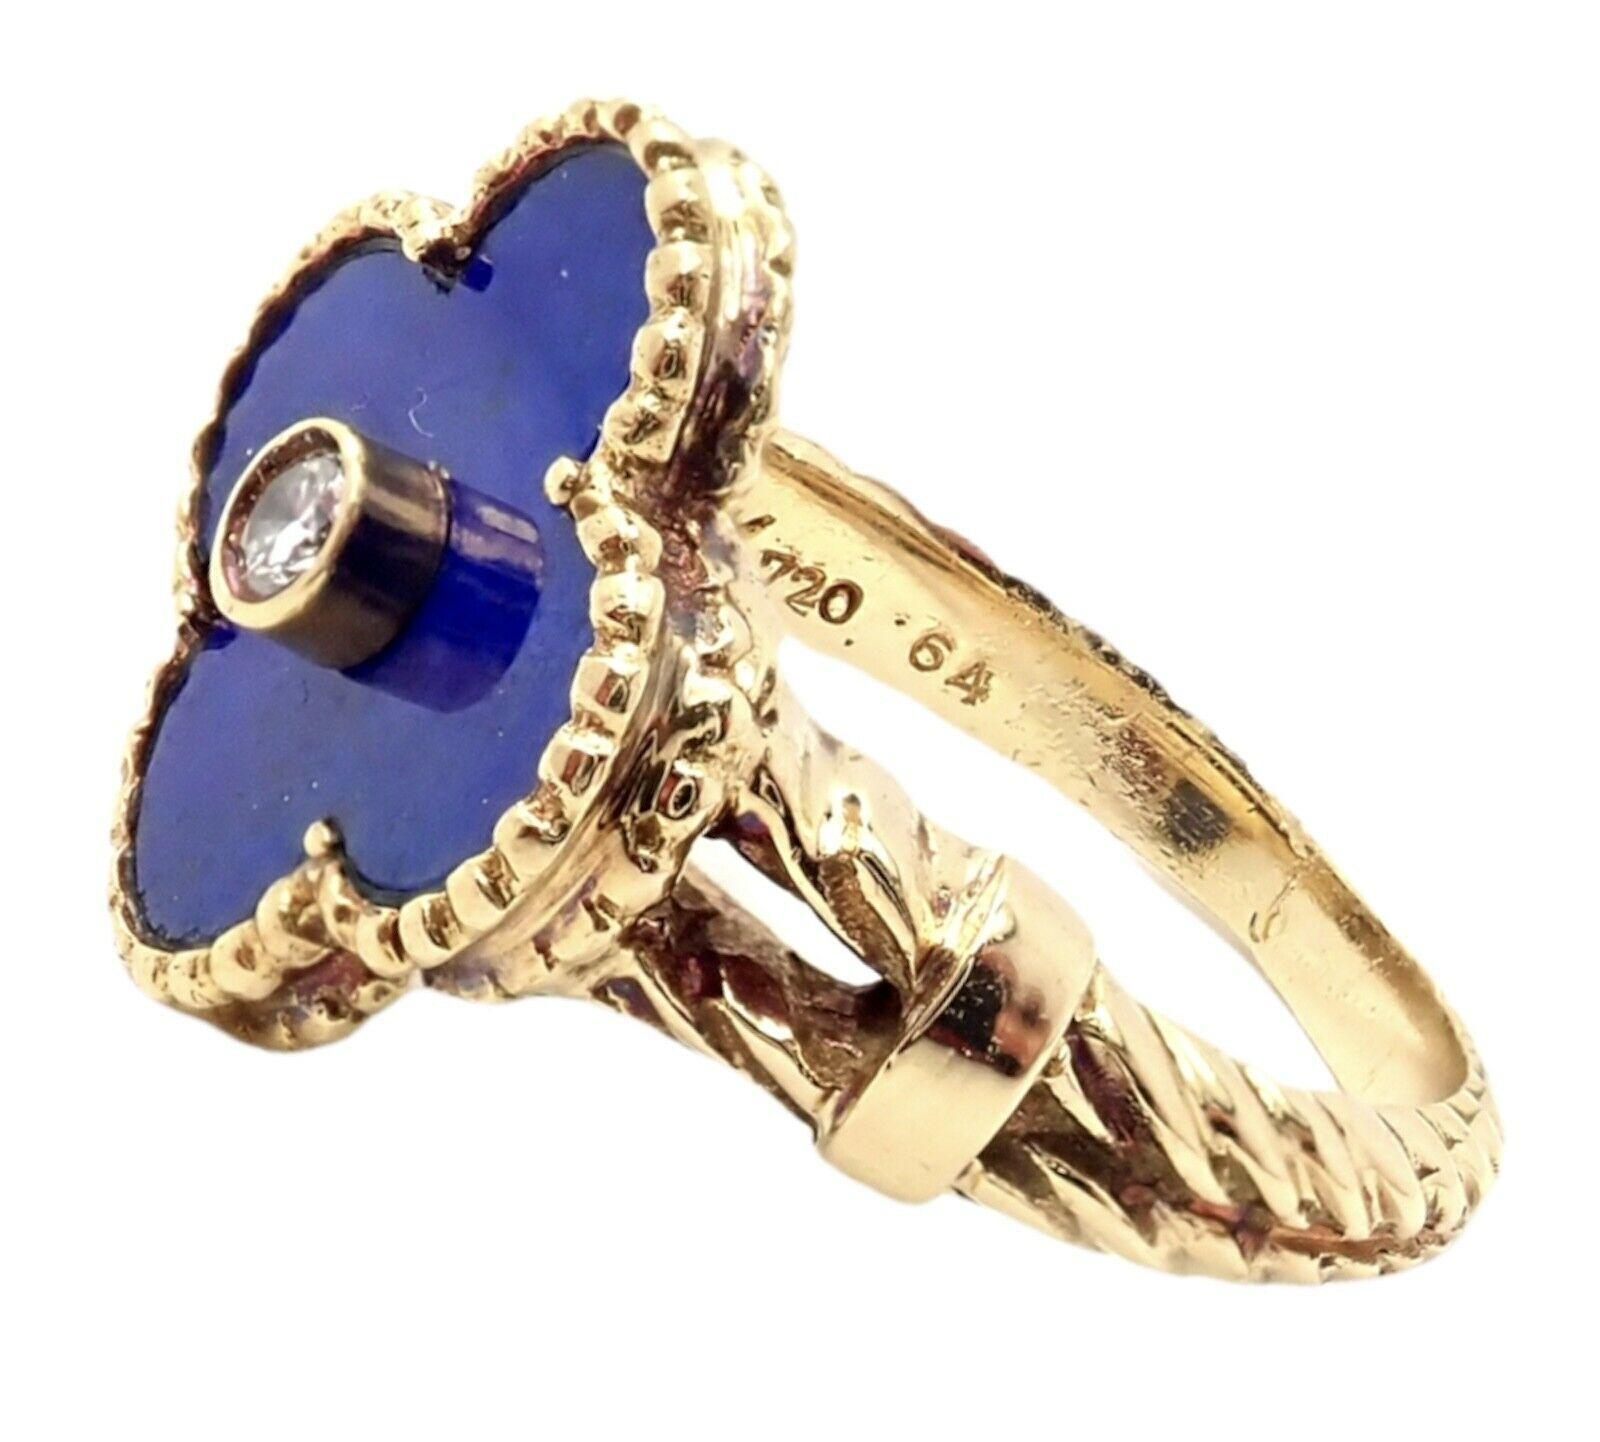 Van Cleef & Arpels Vintage Alhambra Lapis Lazuli Diamond Yellow Gold Ring In Excellent Condition For Sale In Holland, PA